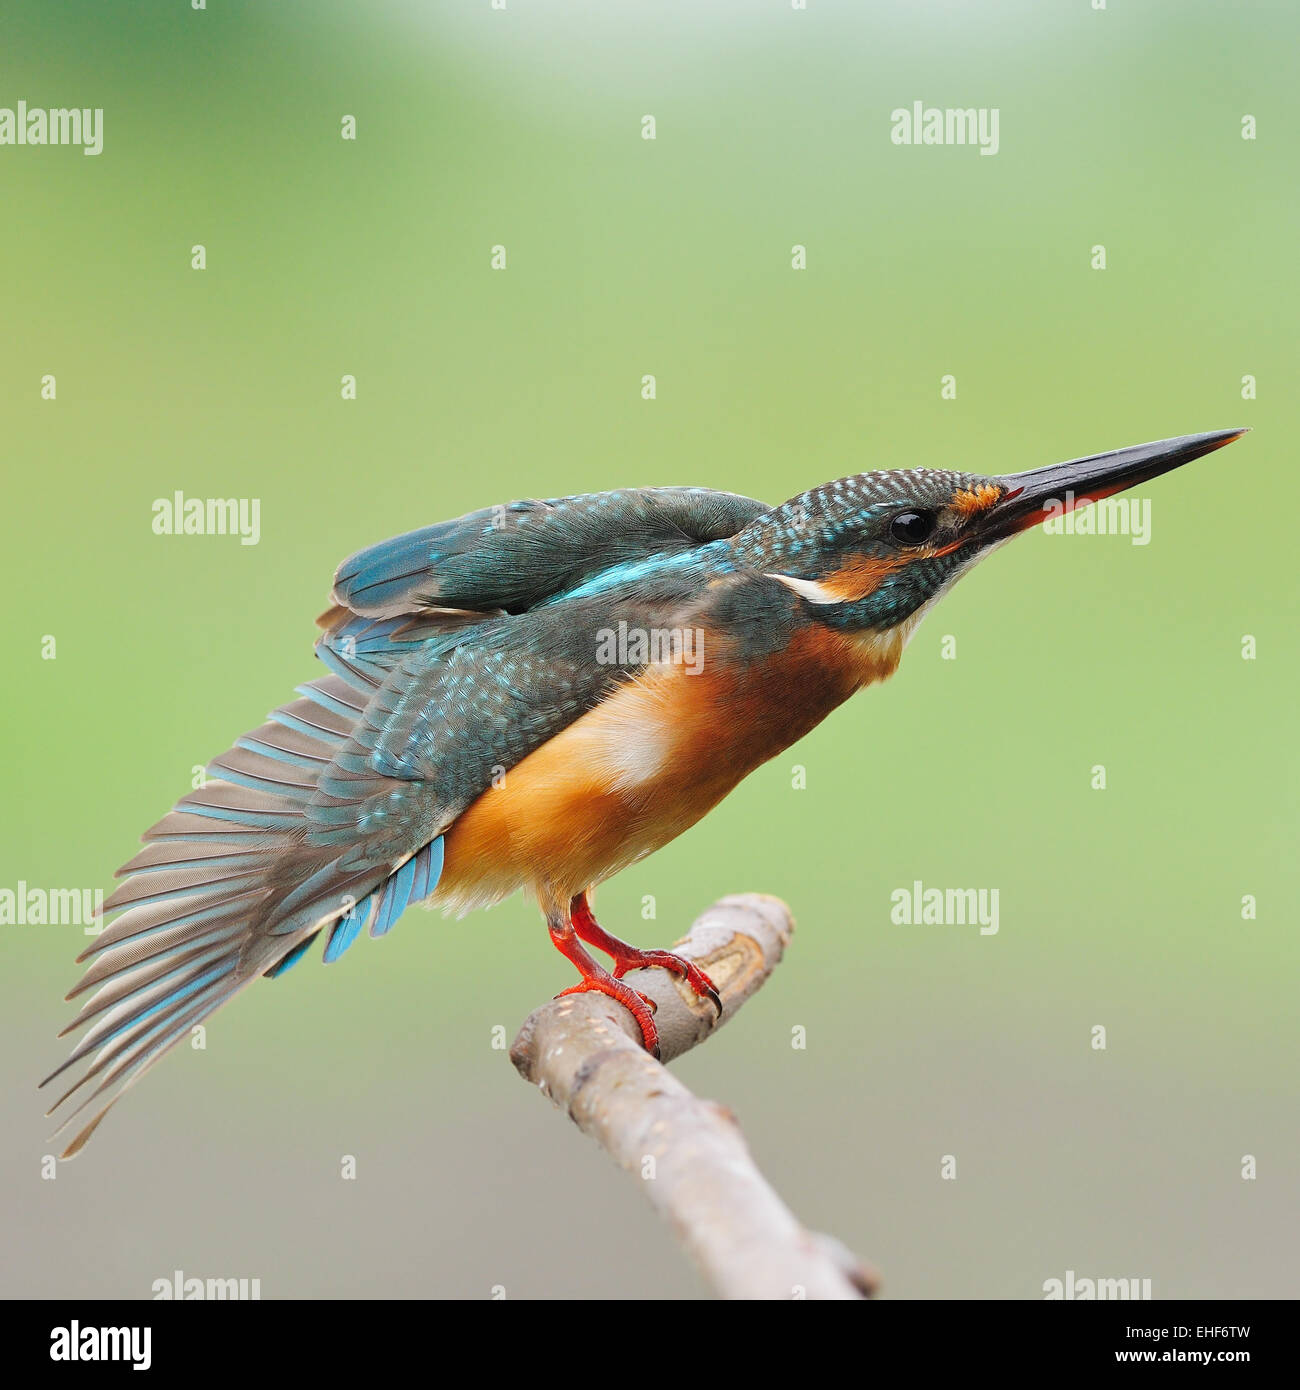 Colorful Kingfisher bird, female Common Kingfisher (Alcedo athis), standing on a branch Stock Photo